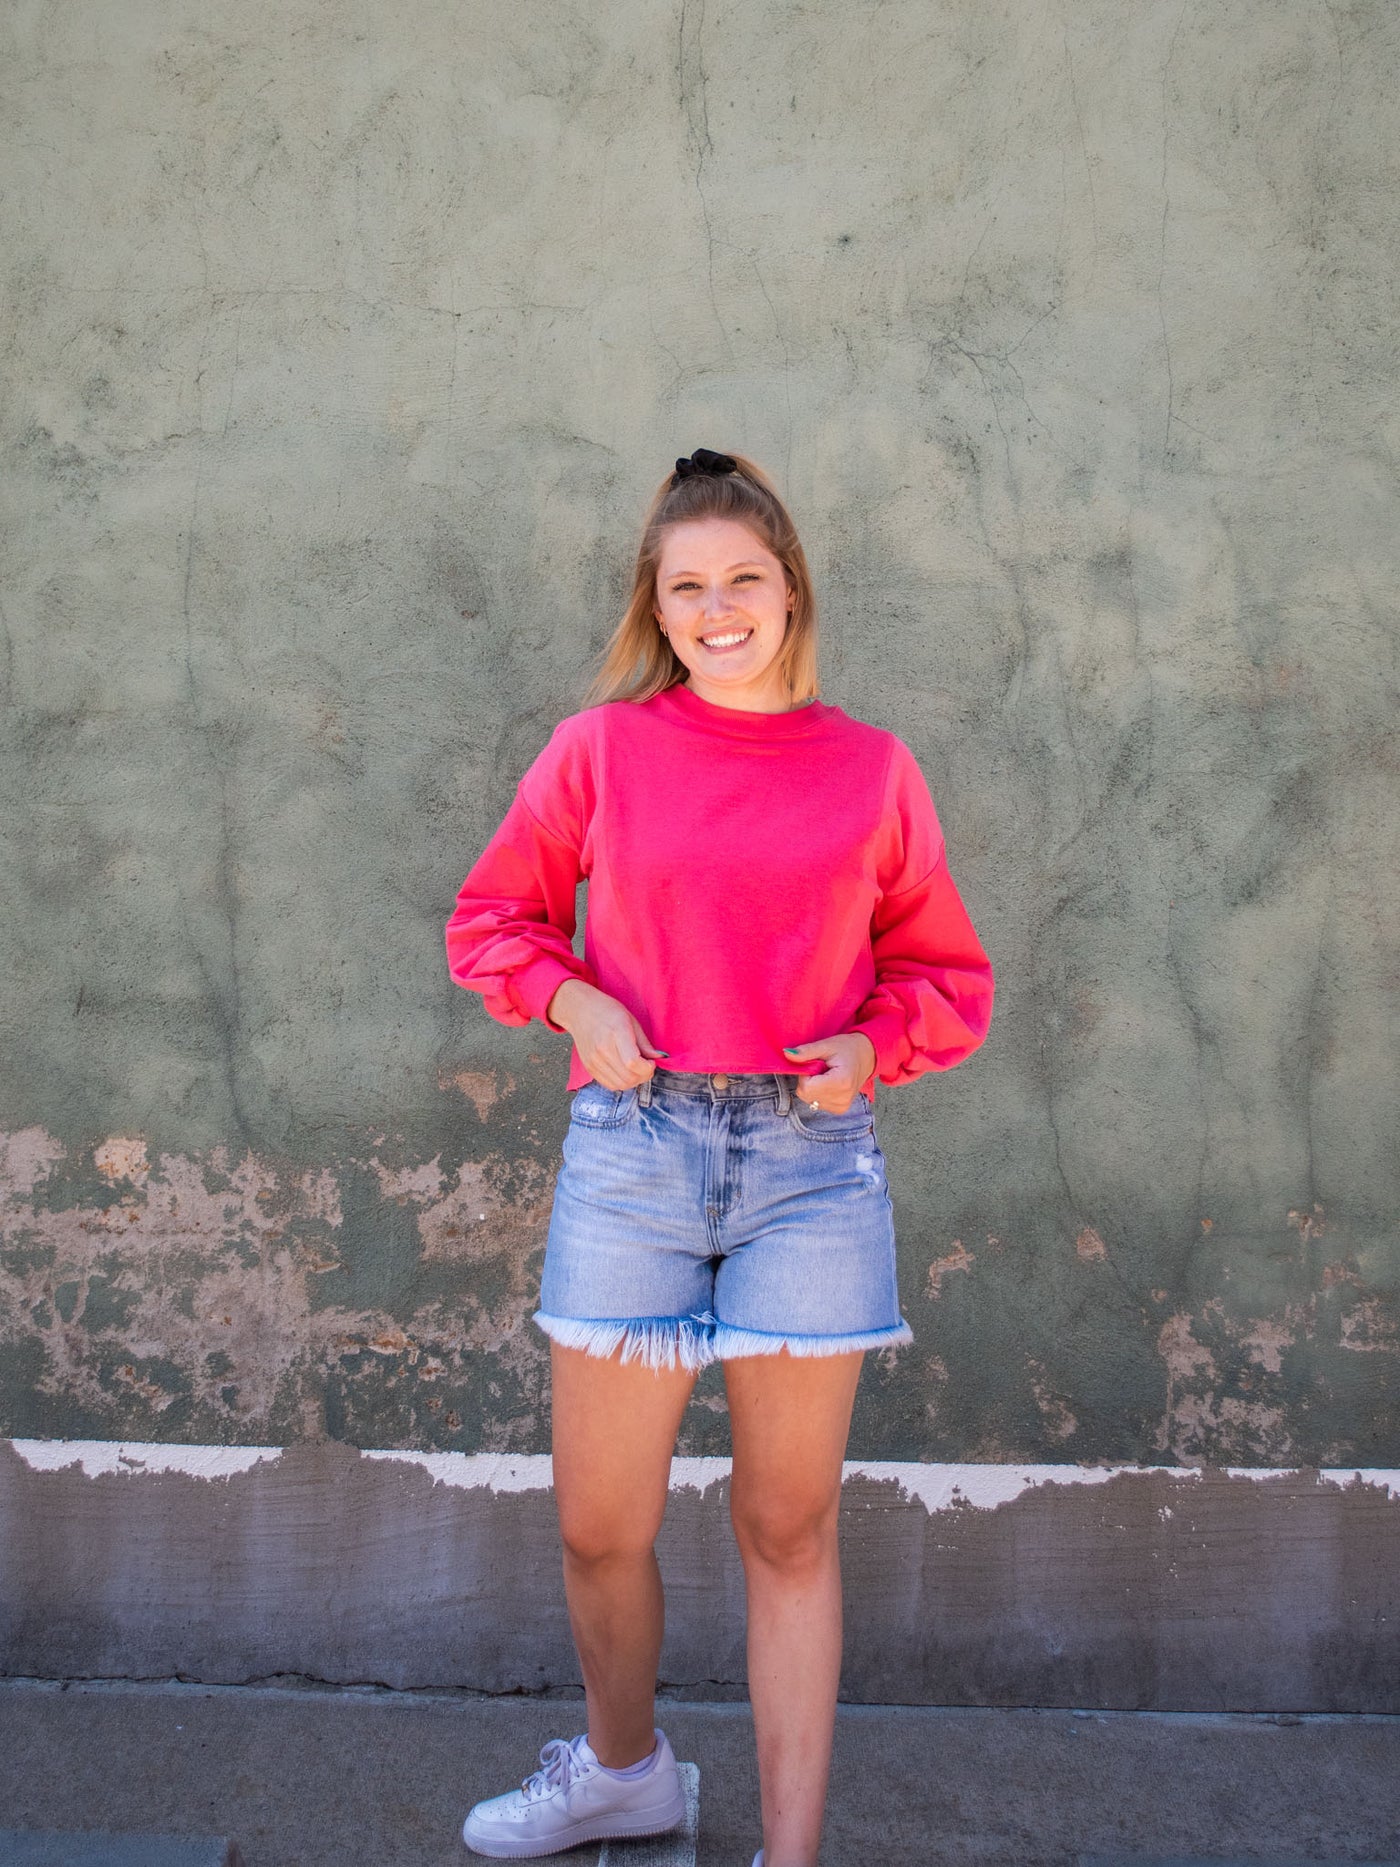 A model wearing a hot pink colored cropped sweatshirt with arm stitching details. She has it on with light washed, frayed jean shorts